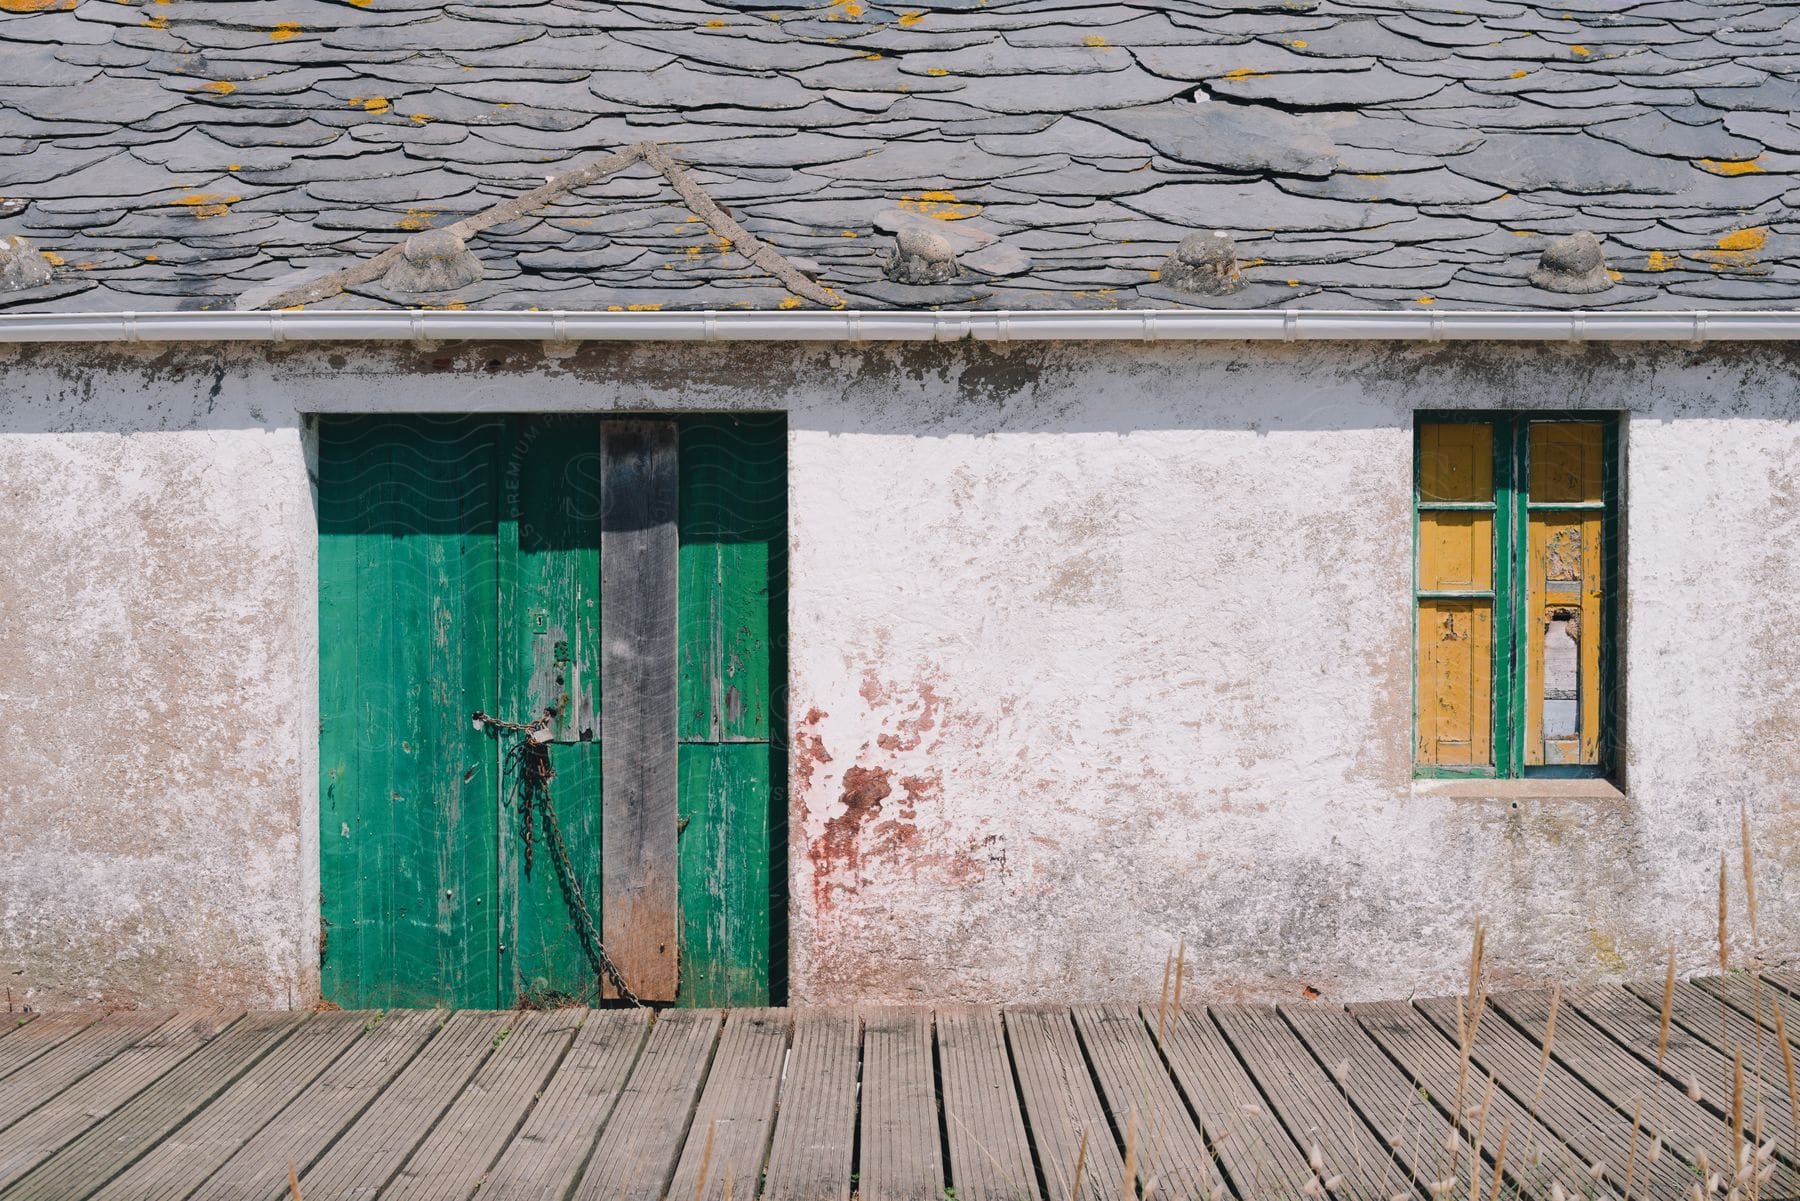 A weathered house with a bright yellow window and a chained green door.